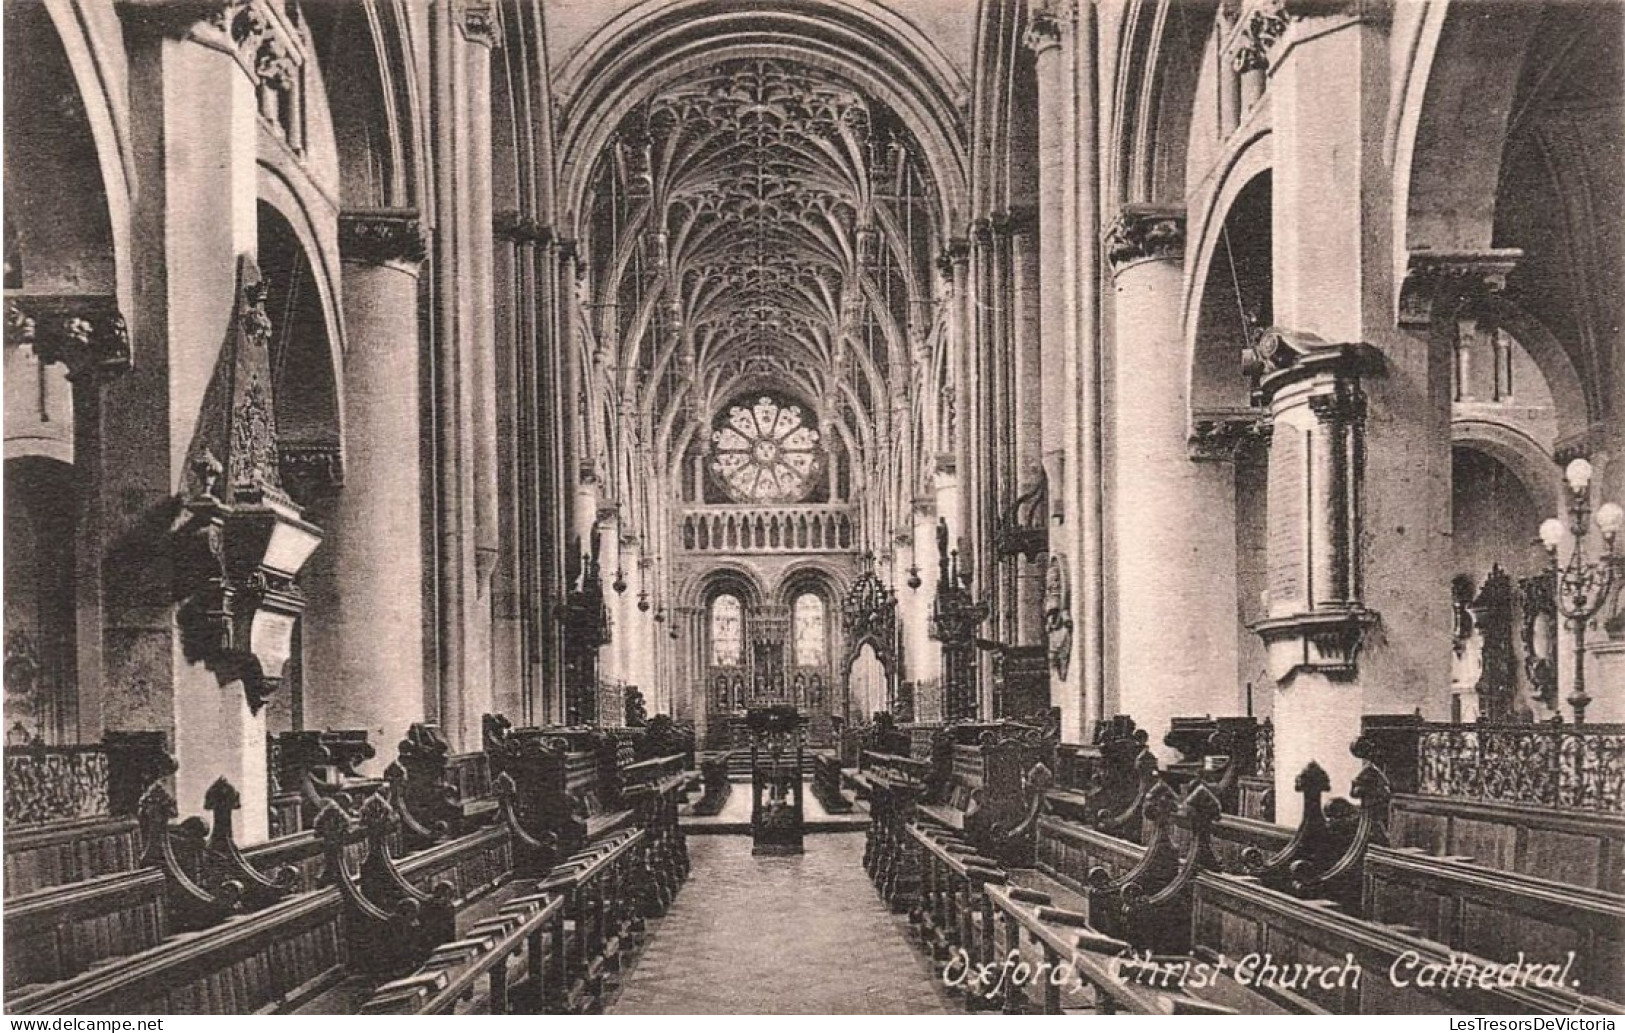 ROYAUME-UNI - Angleterre - Oxford - Christ Church Cathedral - Carte Postale Ancienne - Oxford